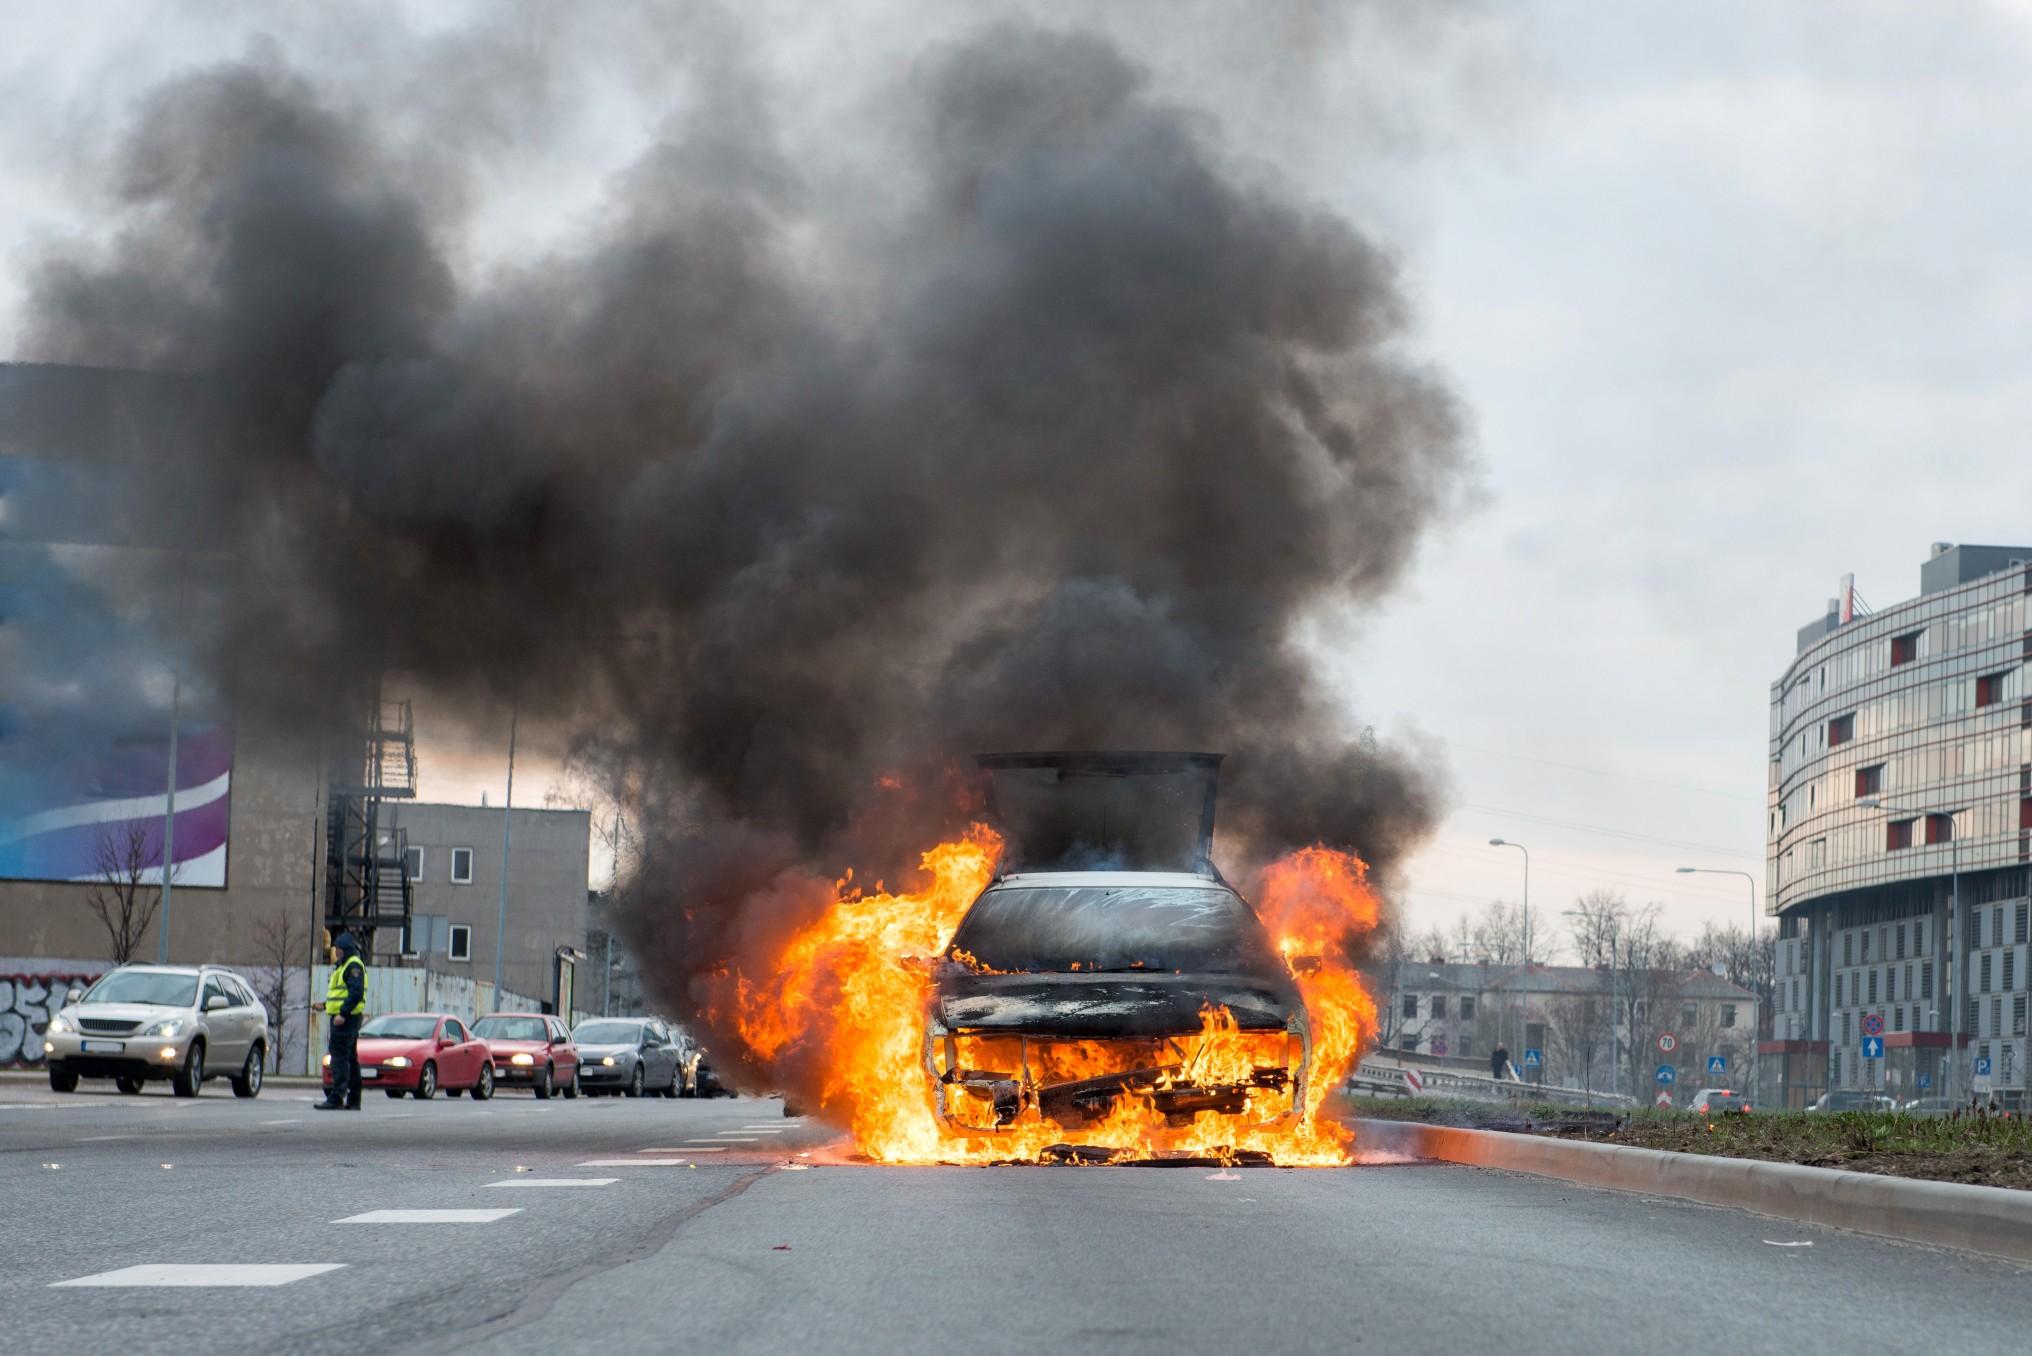 Nobody wants bed bugs, but setting your car on fire is a little extreme.